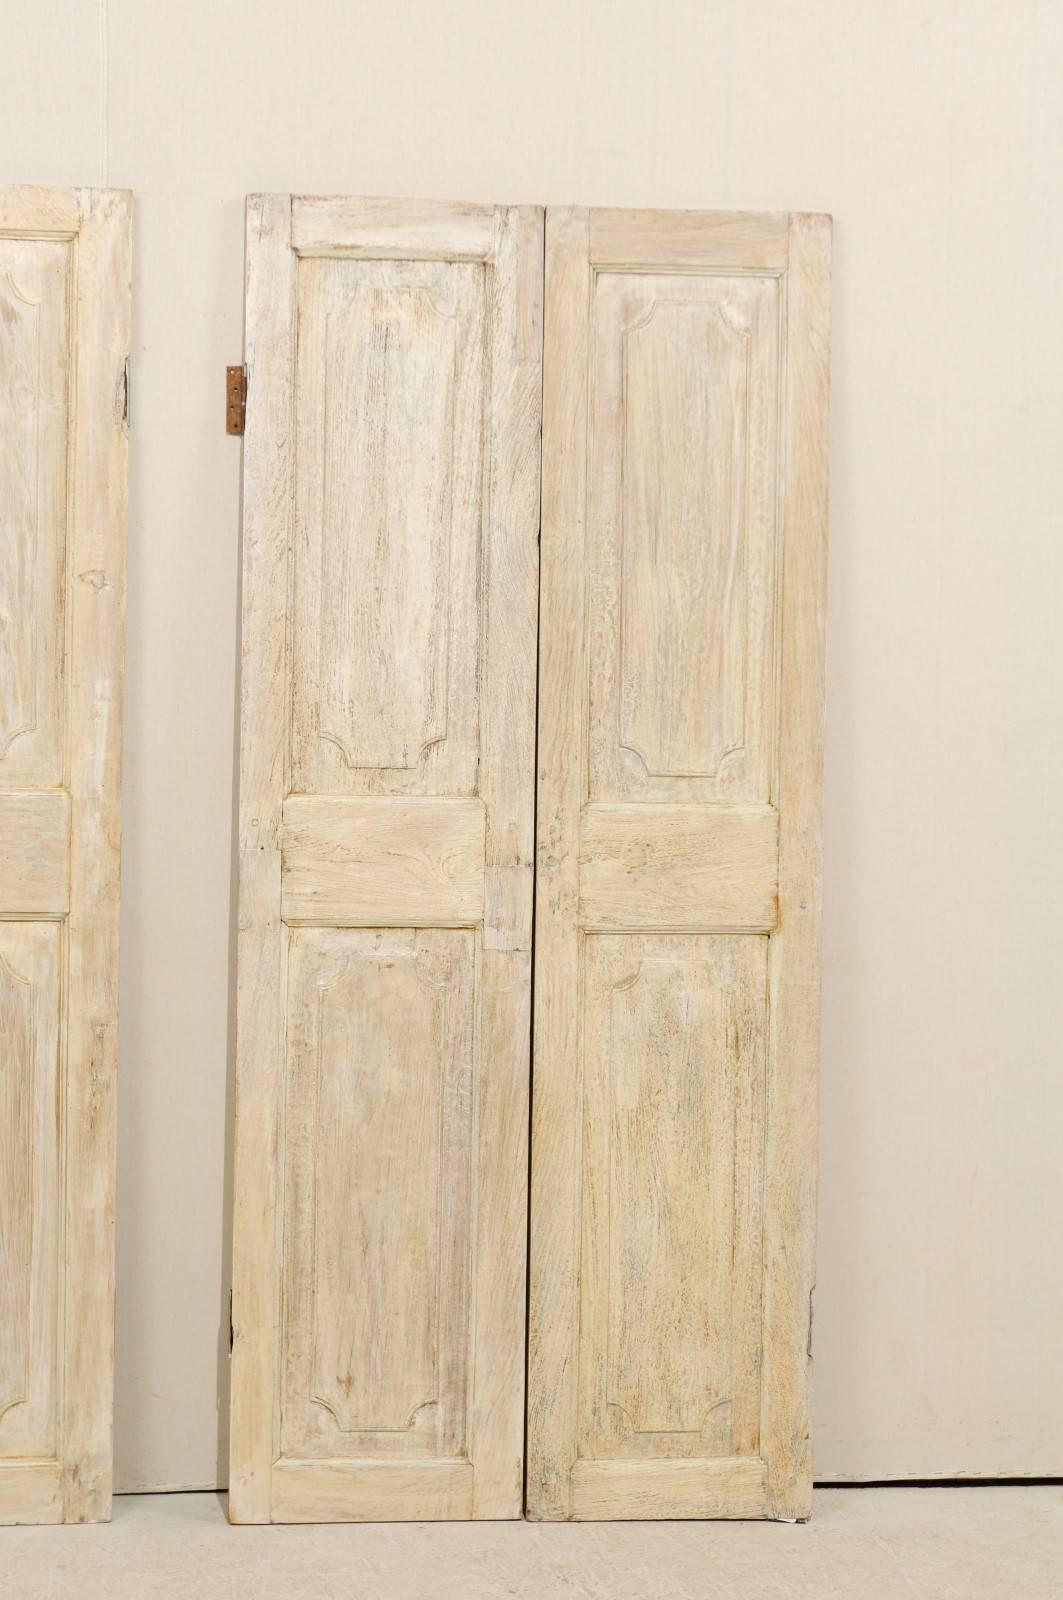 One Pair of Lovely French 19th Century Doors in Antiqued Beige and White Hues 4